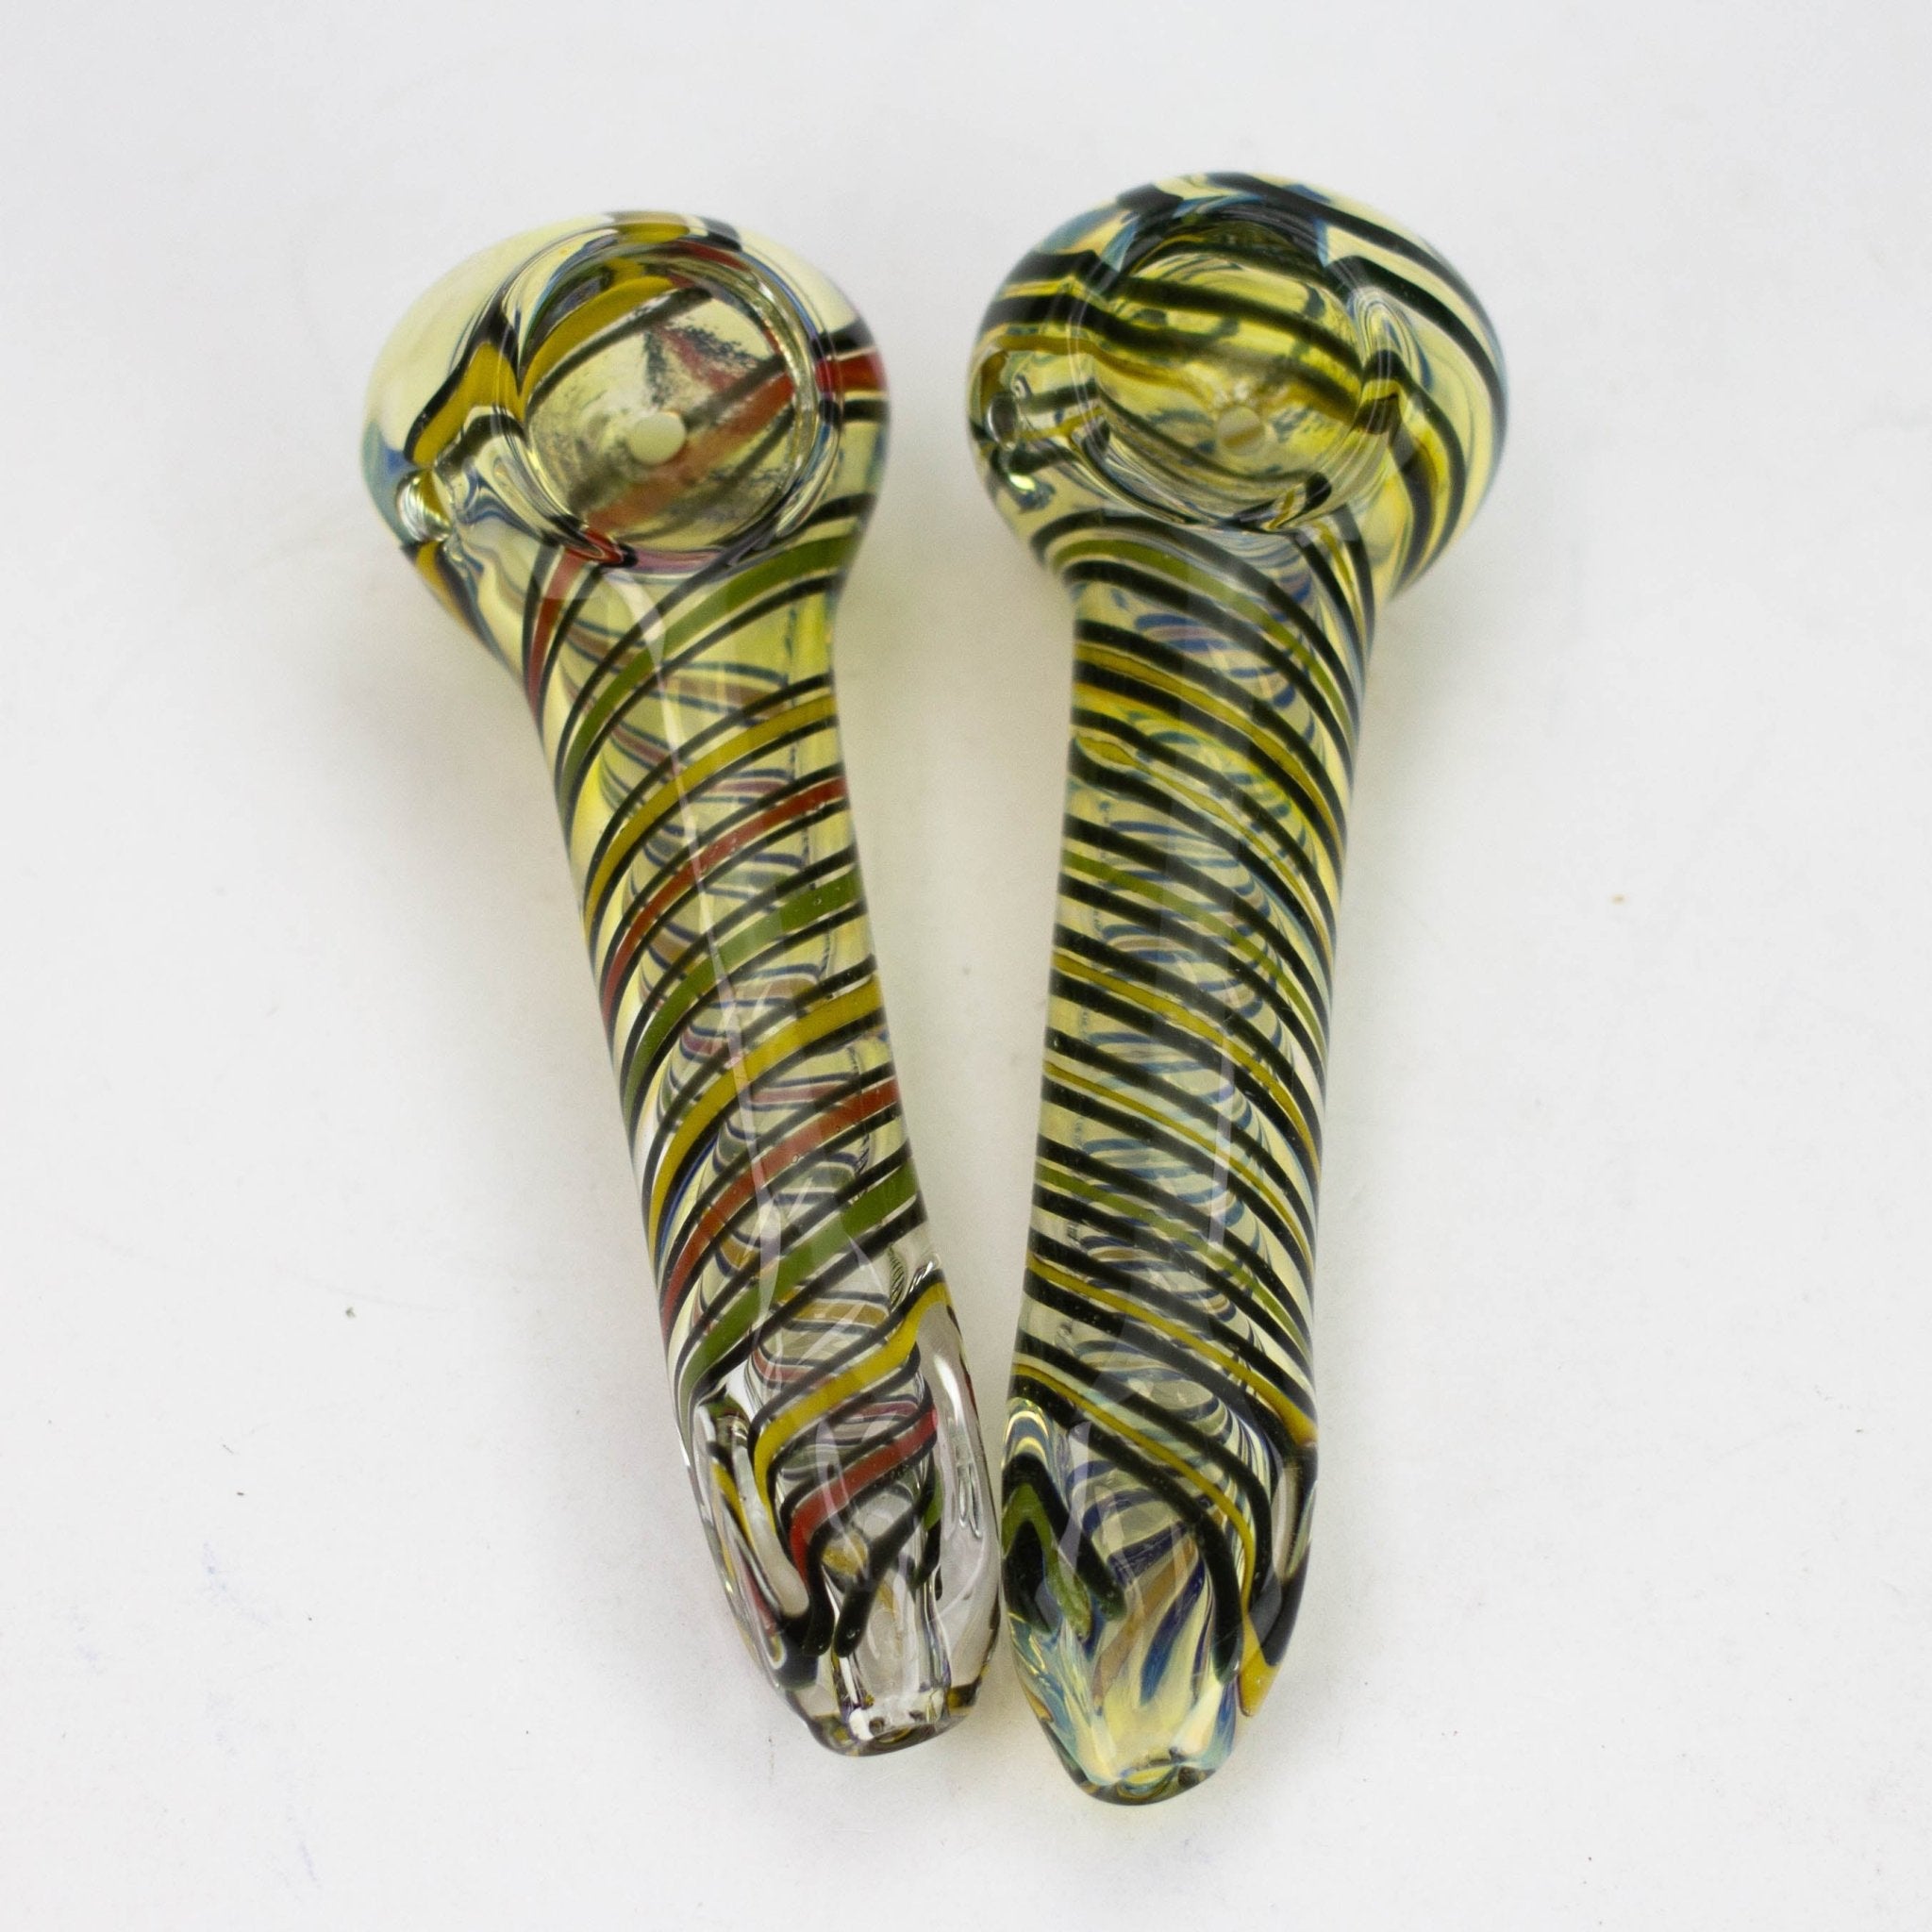 Soft Glass 5" Hand Pipe 2 Pack - Glasss Station